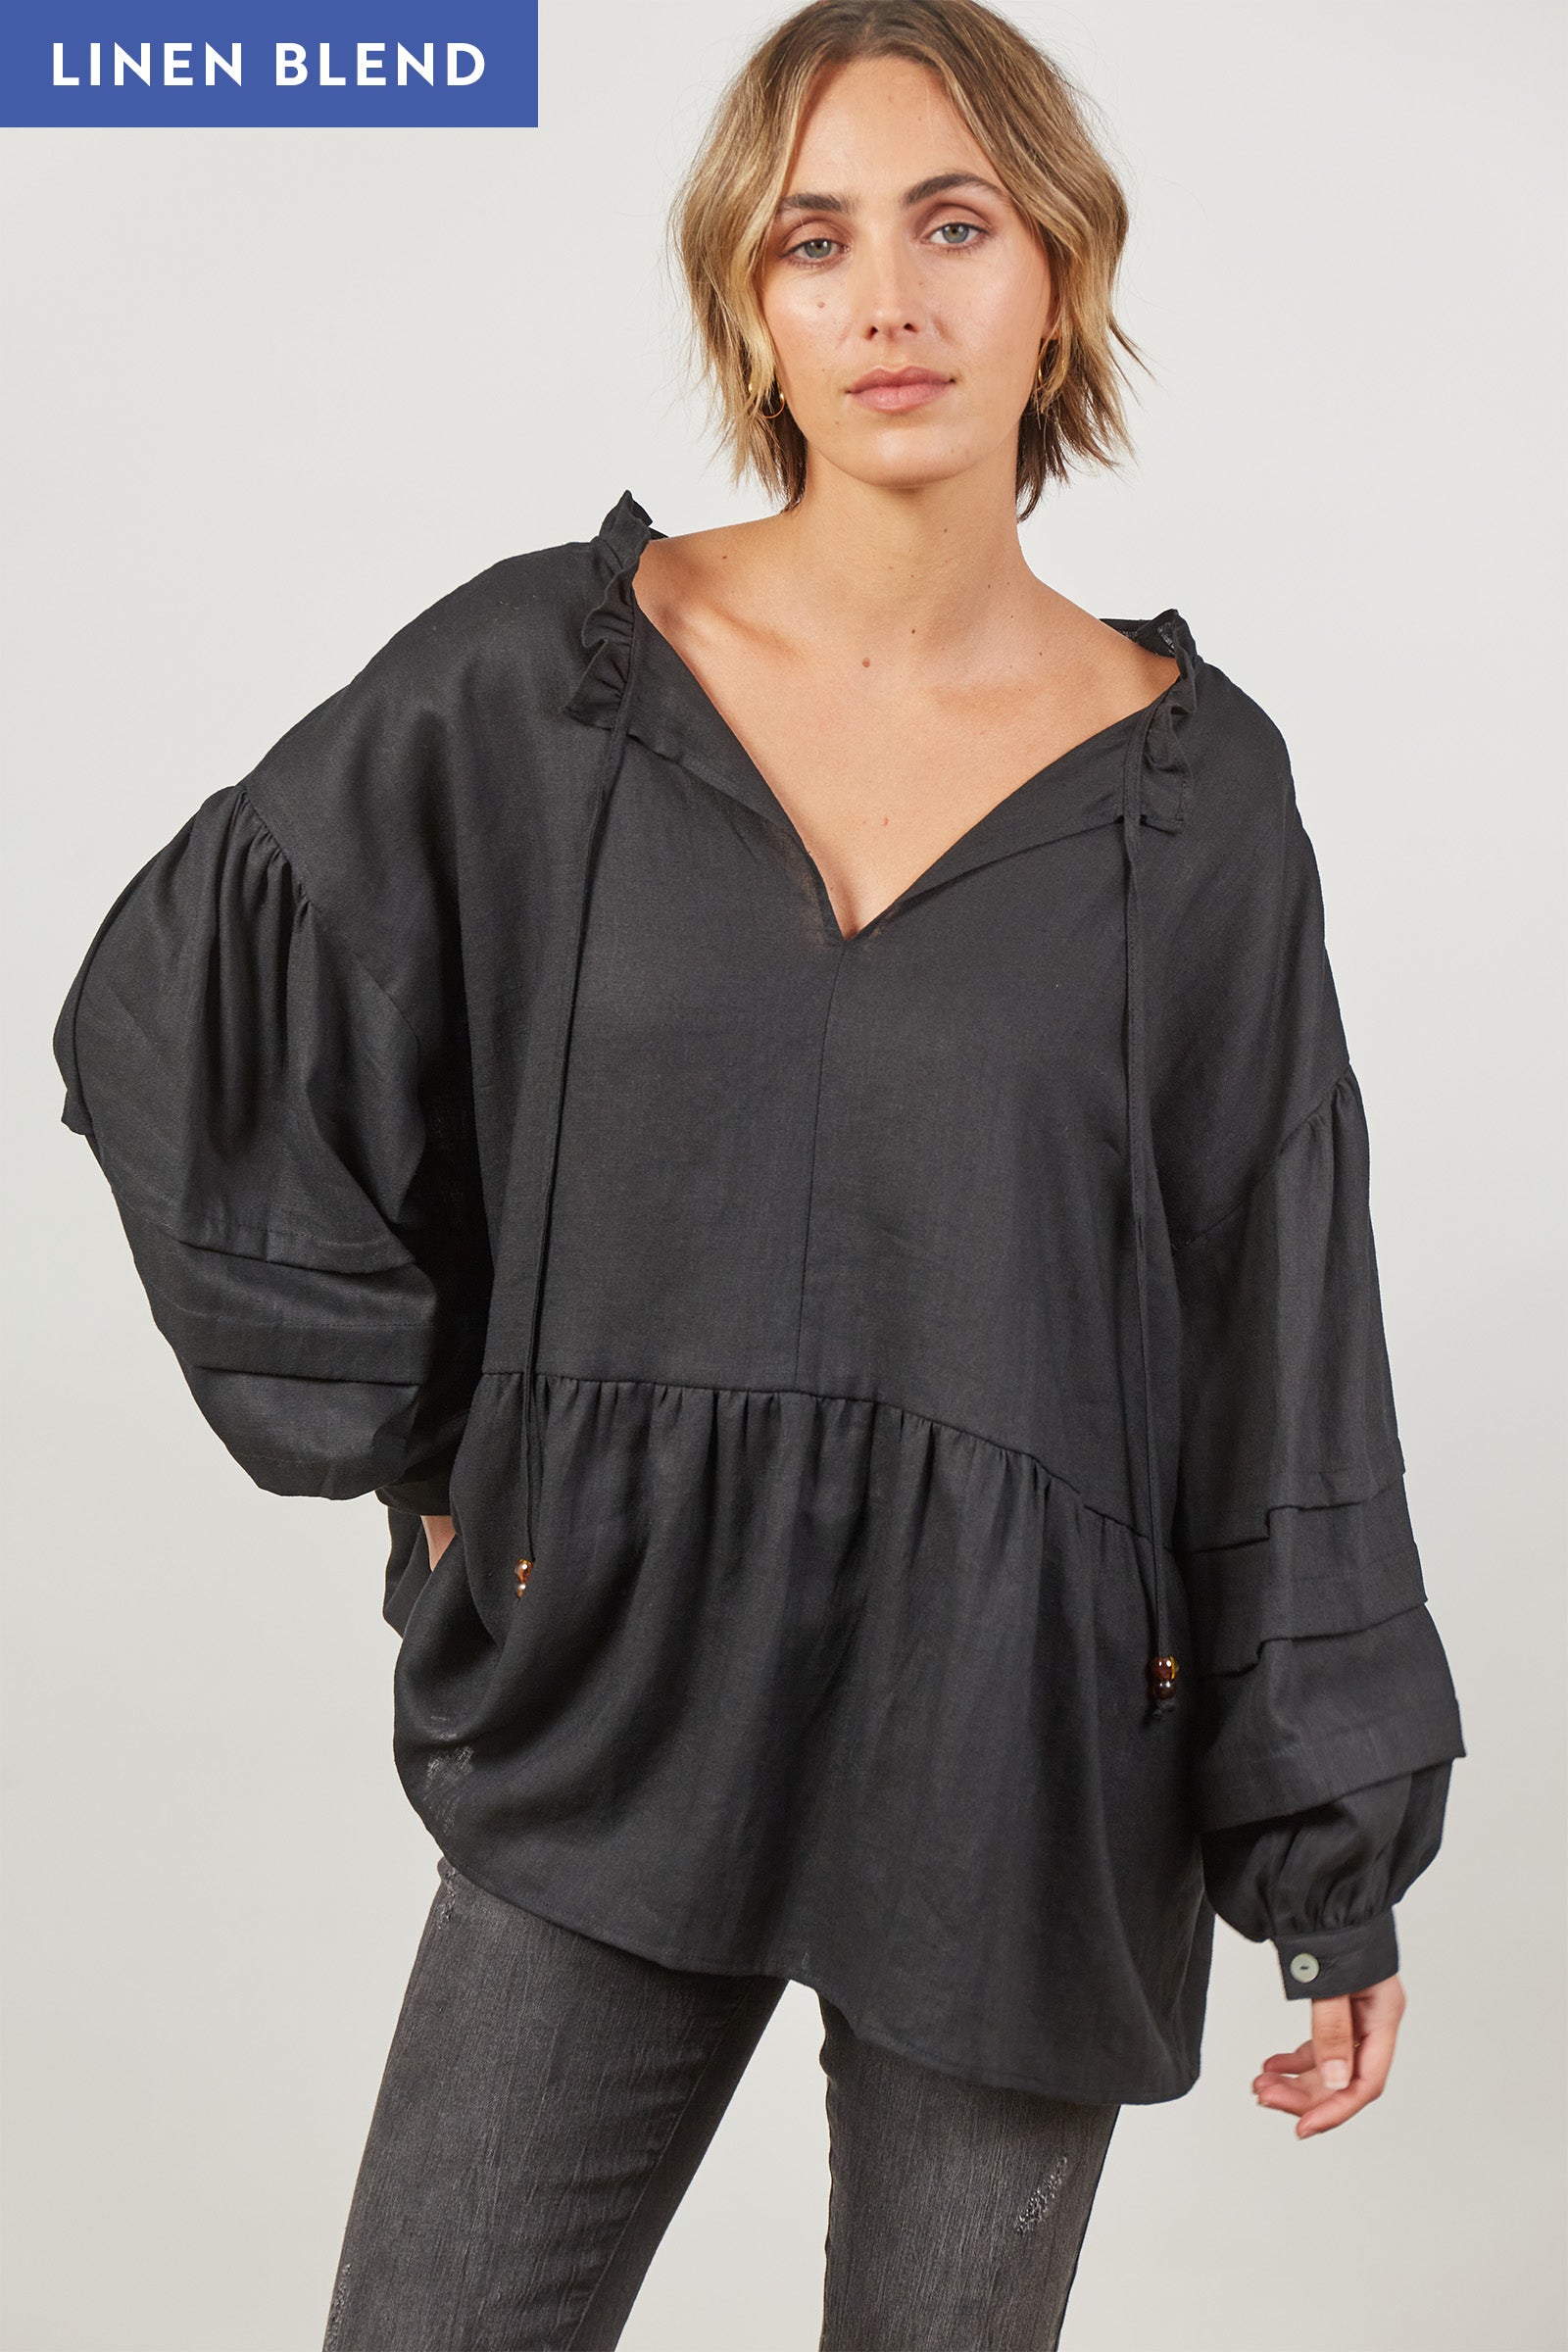 Panorama Relax Top - Onyx - Isle of Mine Clothing - Top L/S One Size